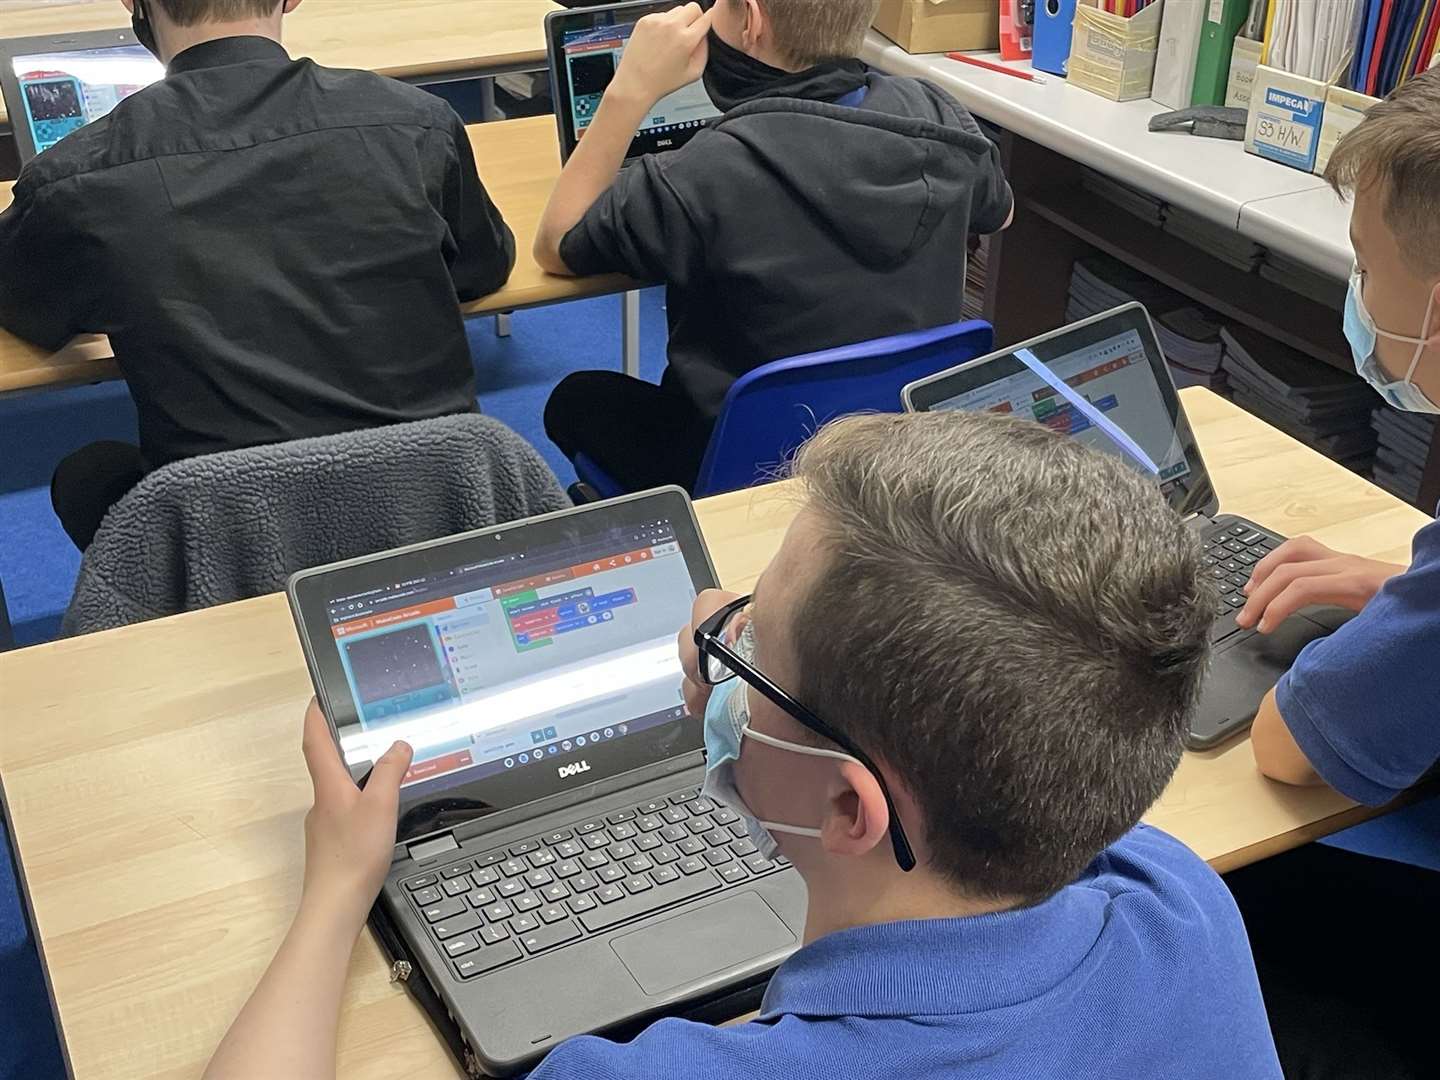 The three monthly sessions enabled pupils to delve more deeply into coding and game design.